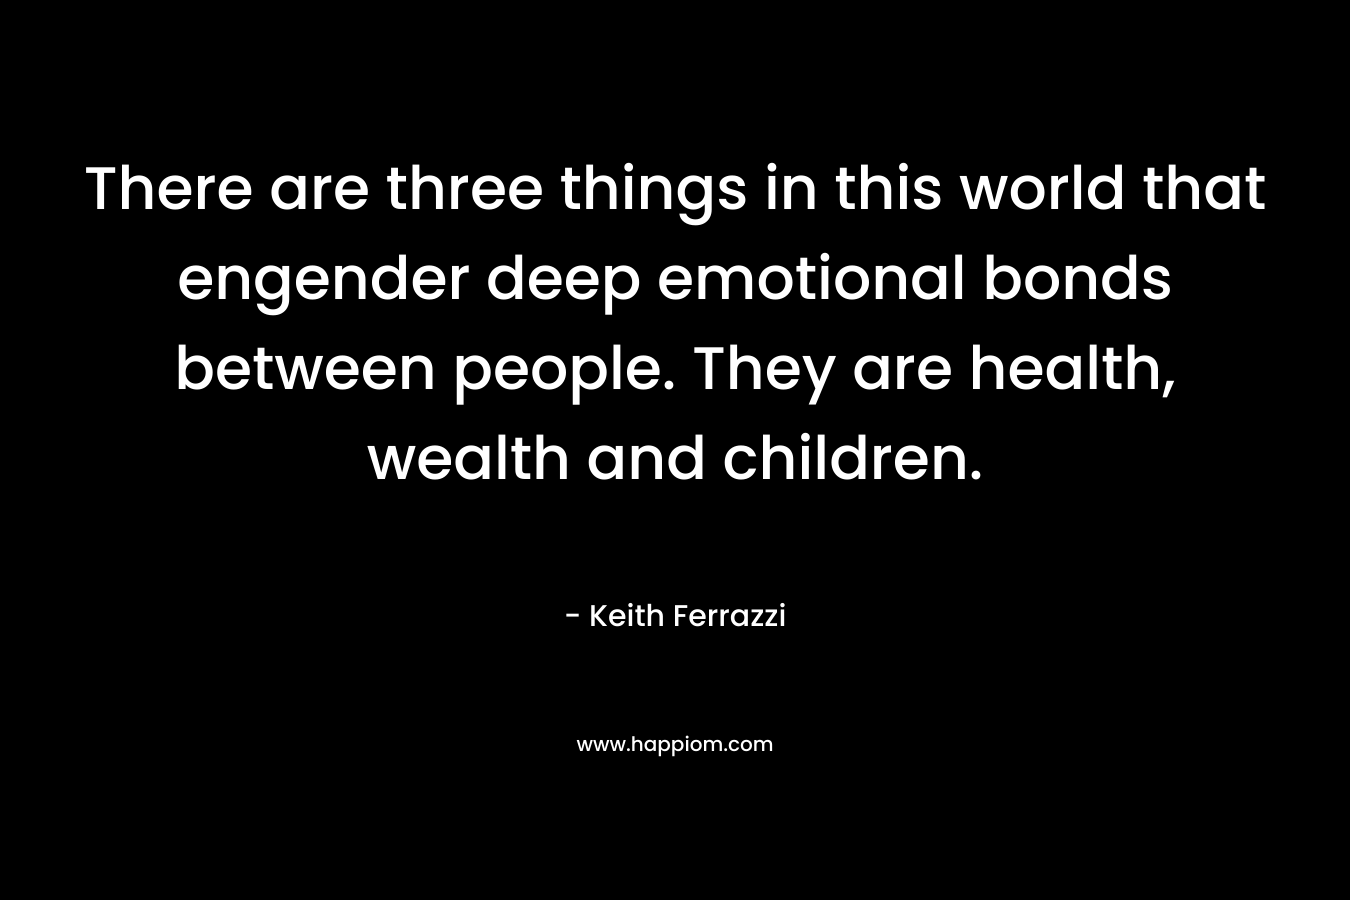 There are three things in this world that engender deep emotional bonds between people. They are health, wealth and children. – Keith Ferrazzi